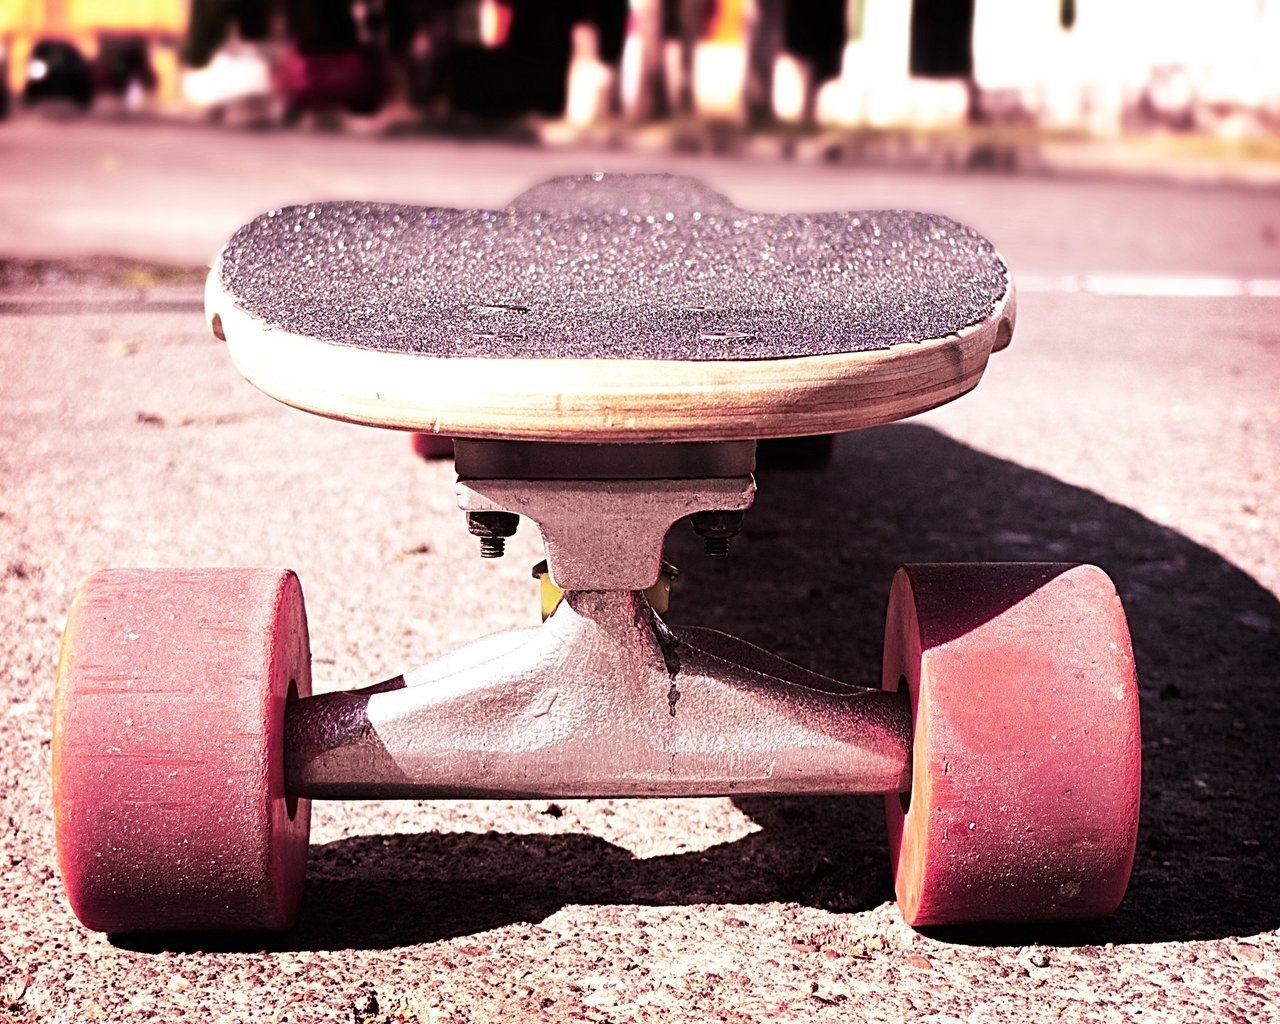 Cool skateboard for 1280 x 1024 resolution